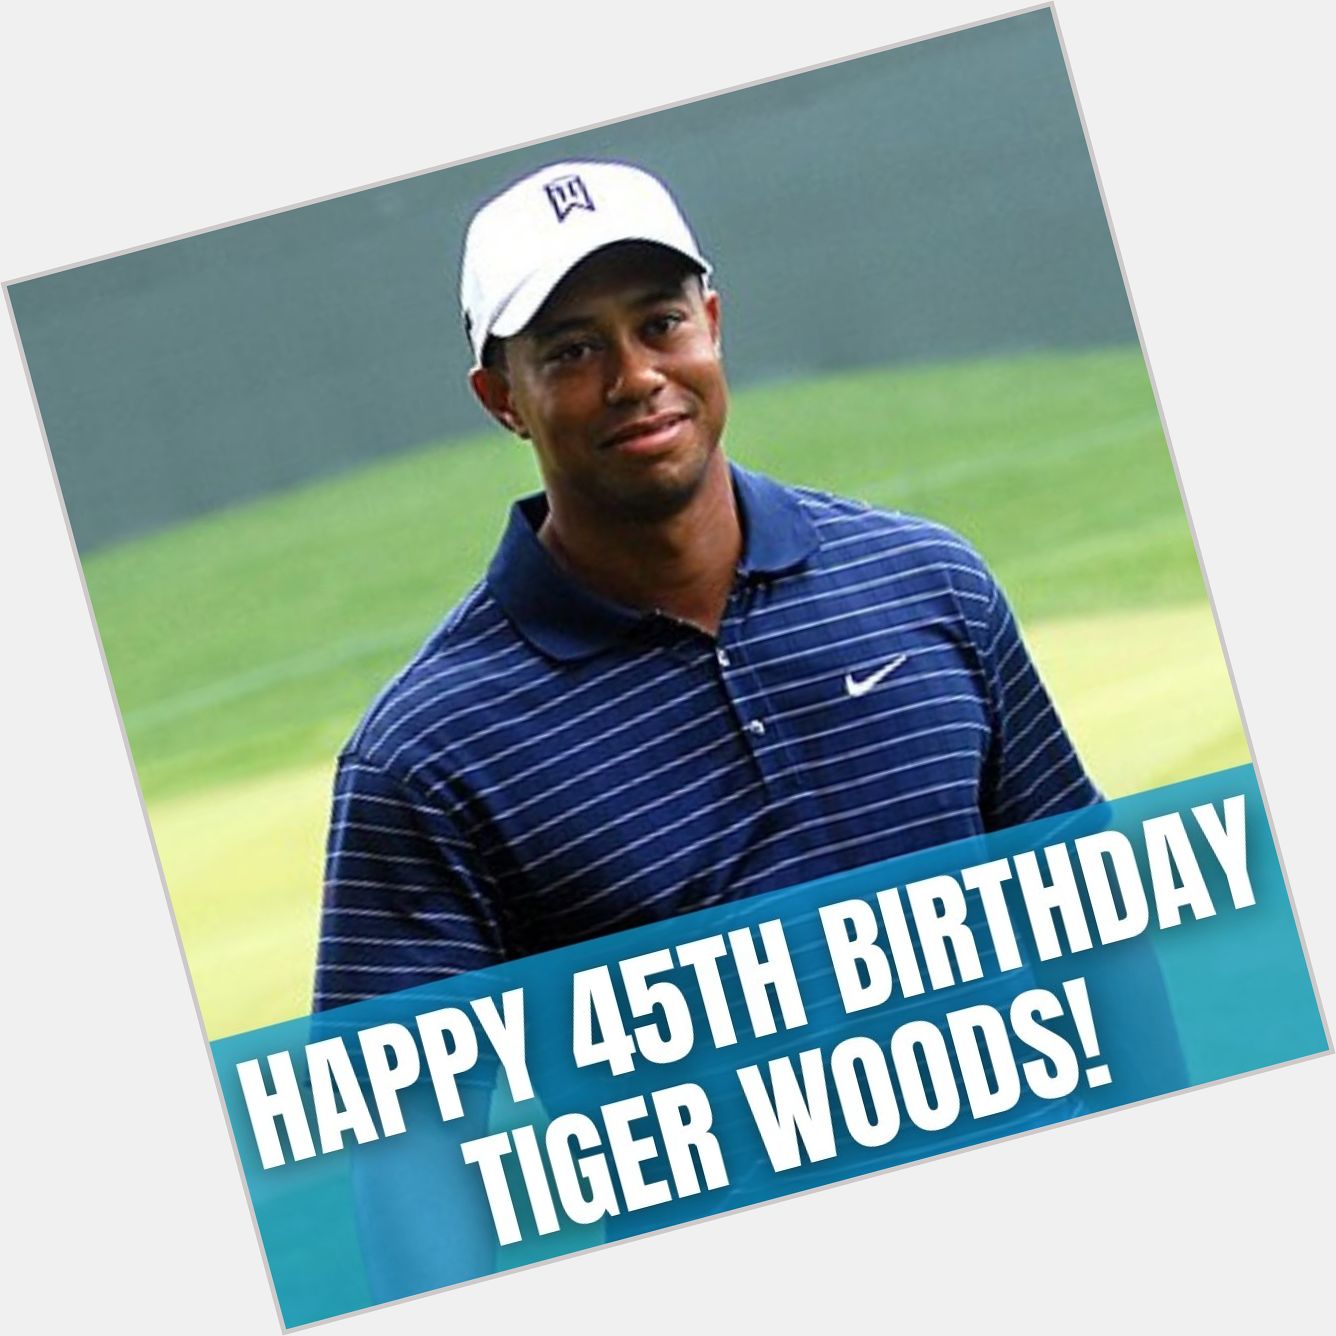 Happy Birthday to Tiger Woods who turned 45 today. 